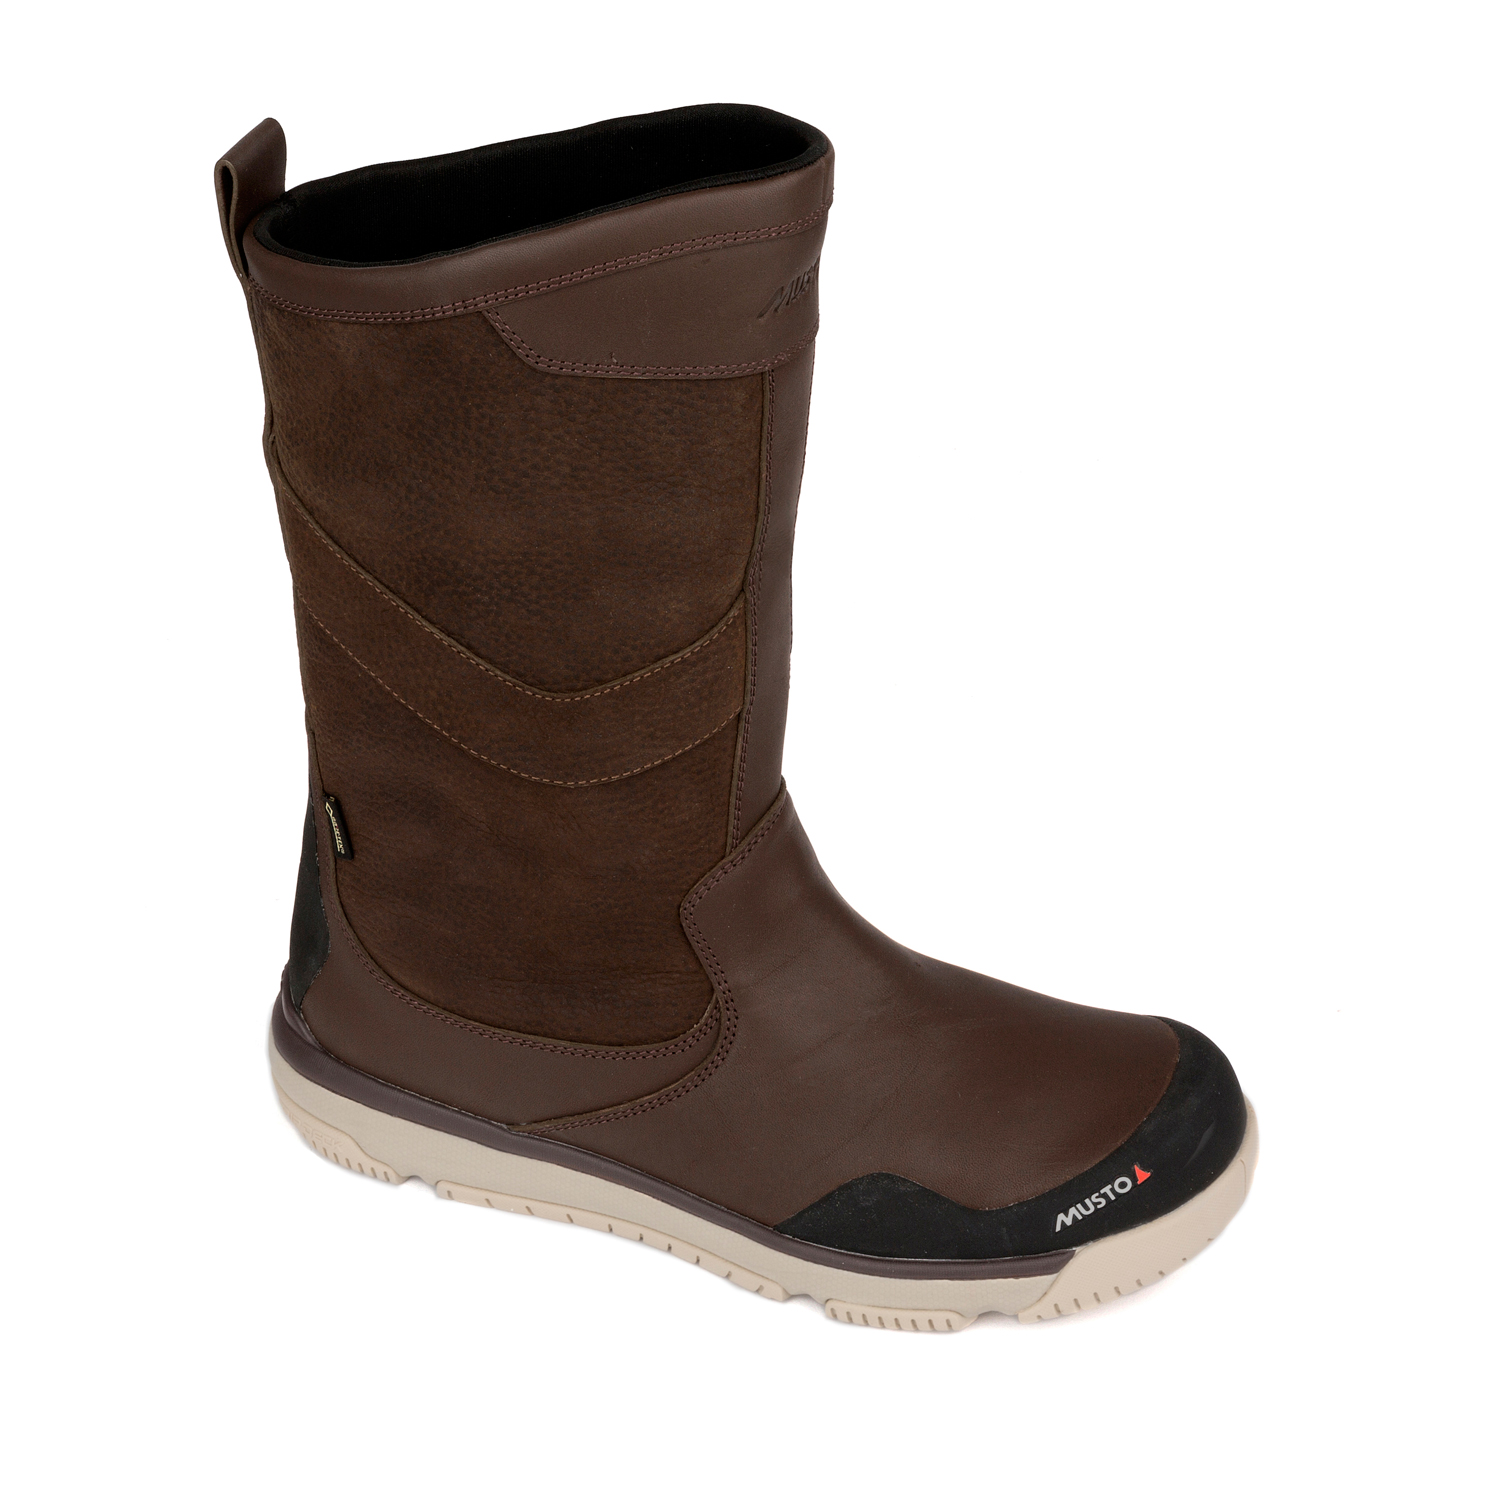 Musto Gore-Tex Leather Sailing Boot 2018 - Dark Brown | Coast Water Sports